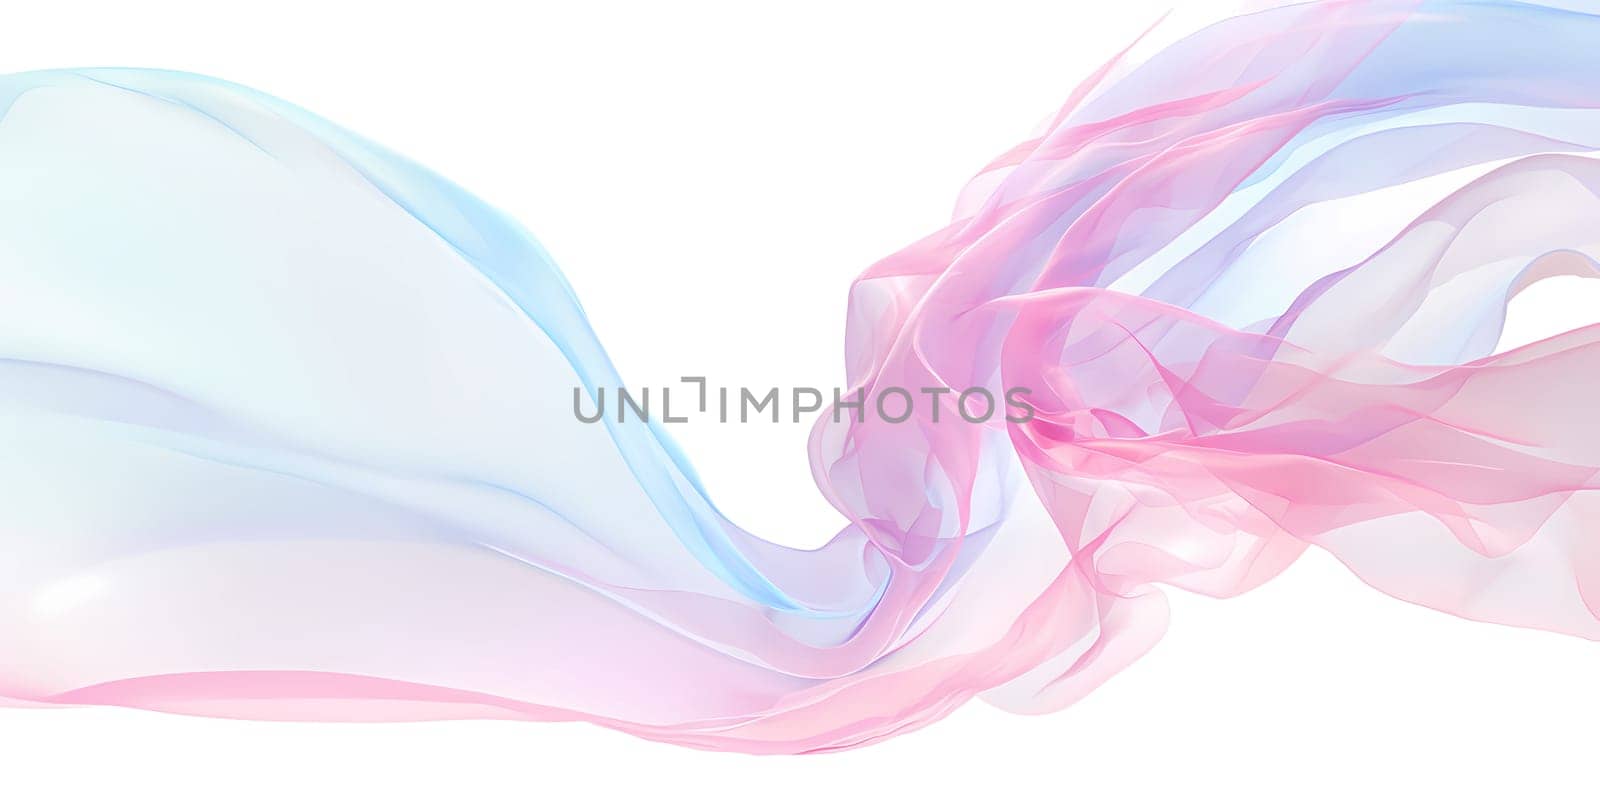 A pink and blue abstract background featuring flowing silk, isolated on white, creating a sense of movement and grace. The colors evoke feelings of joy and celebration.